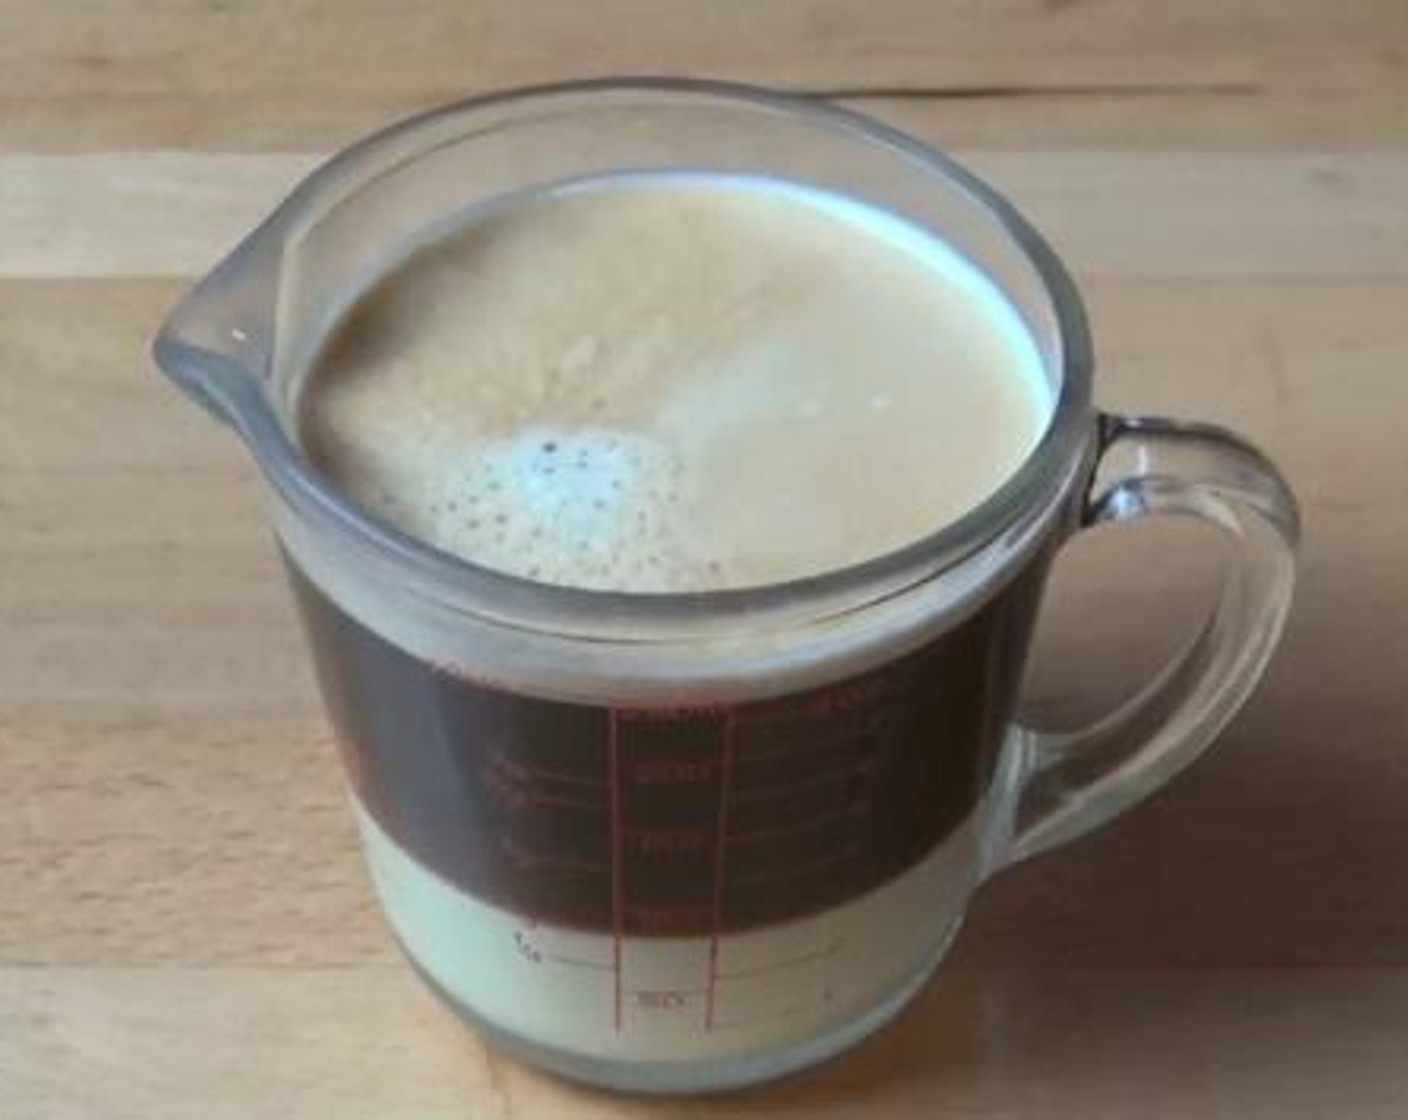 step 1 Into a cup, mix the La Lechera® Sweetened Condensed Milk (1/4 cup) and Coffee (3/4 cup) together.